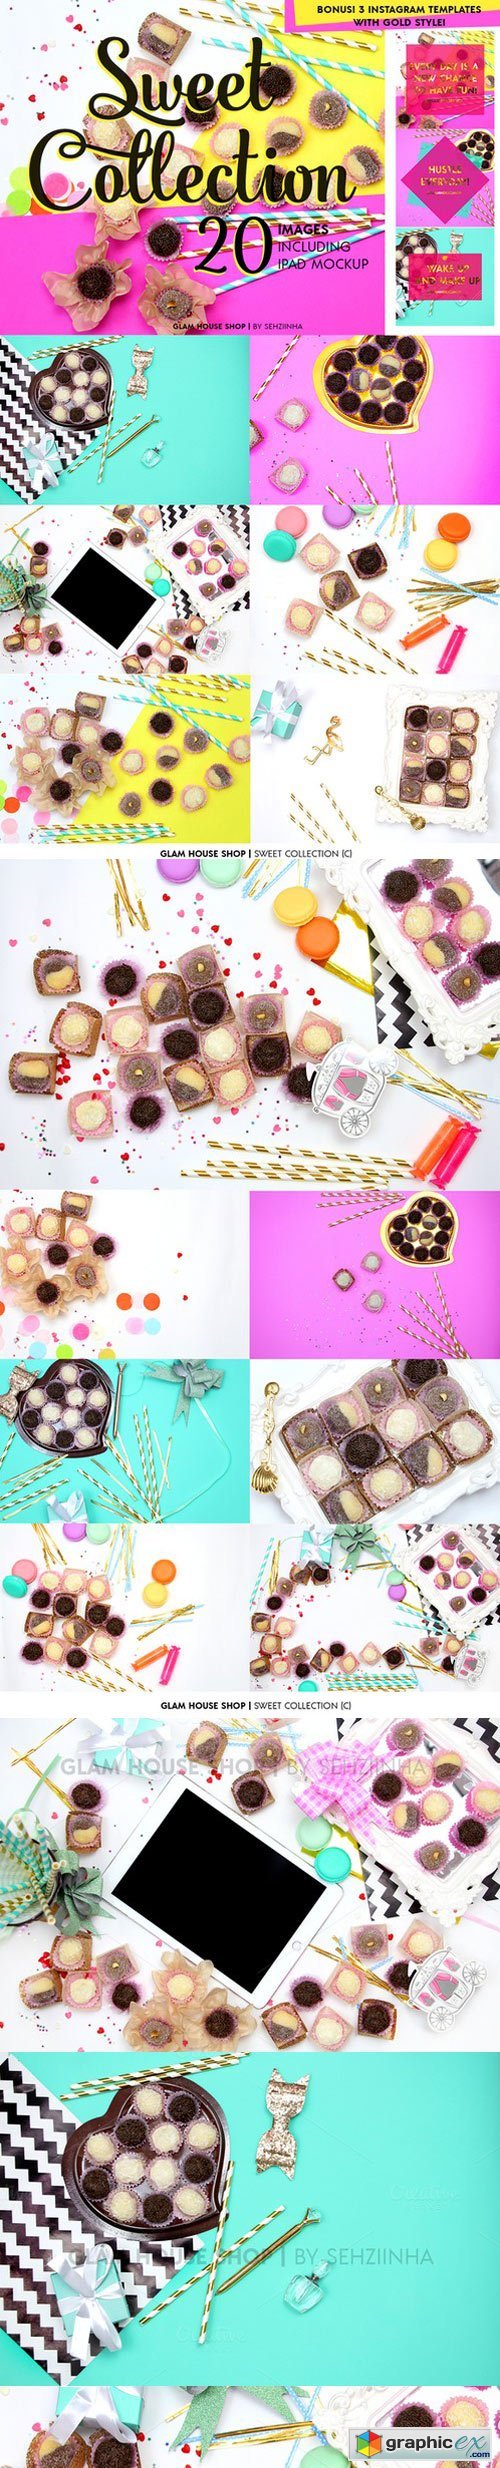 Sweet Collection Styled Stock Photos